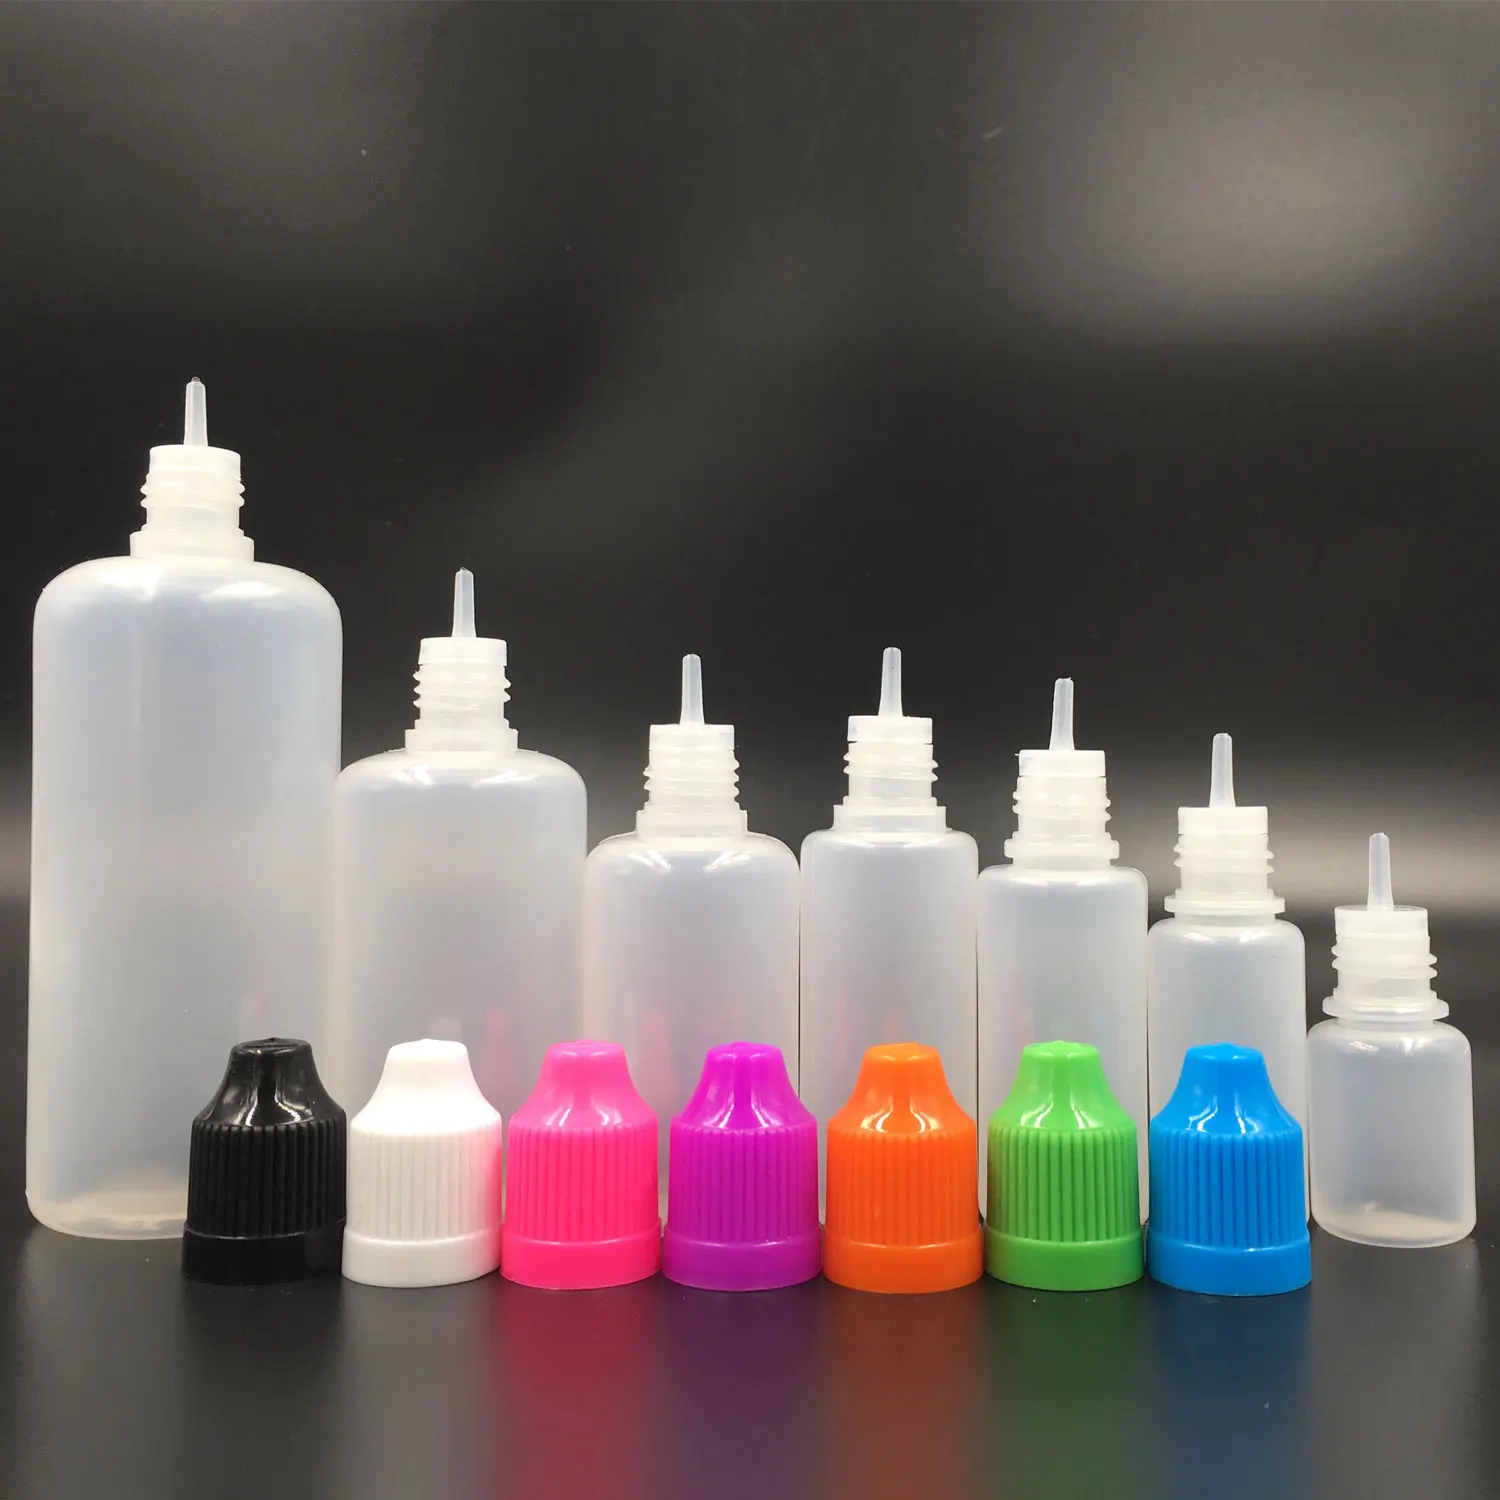 10pcs 5ml-120ml Empty Soft LDPE Dropper Bottles Plastic Containers for E Liquid Vape Bottle with Mixed Caps Lid Plugs mofii 666 2 4g wireless keyboard mouse combo mixed color 110 key keyboard mouse set with round punk keycaps light brown